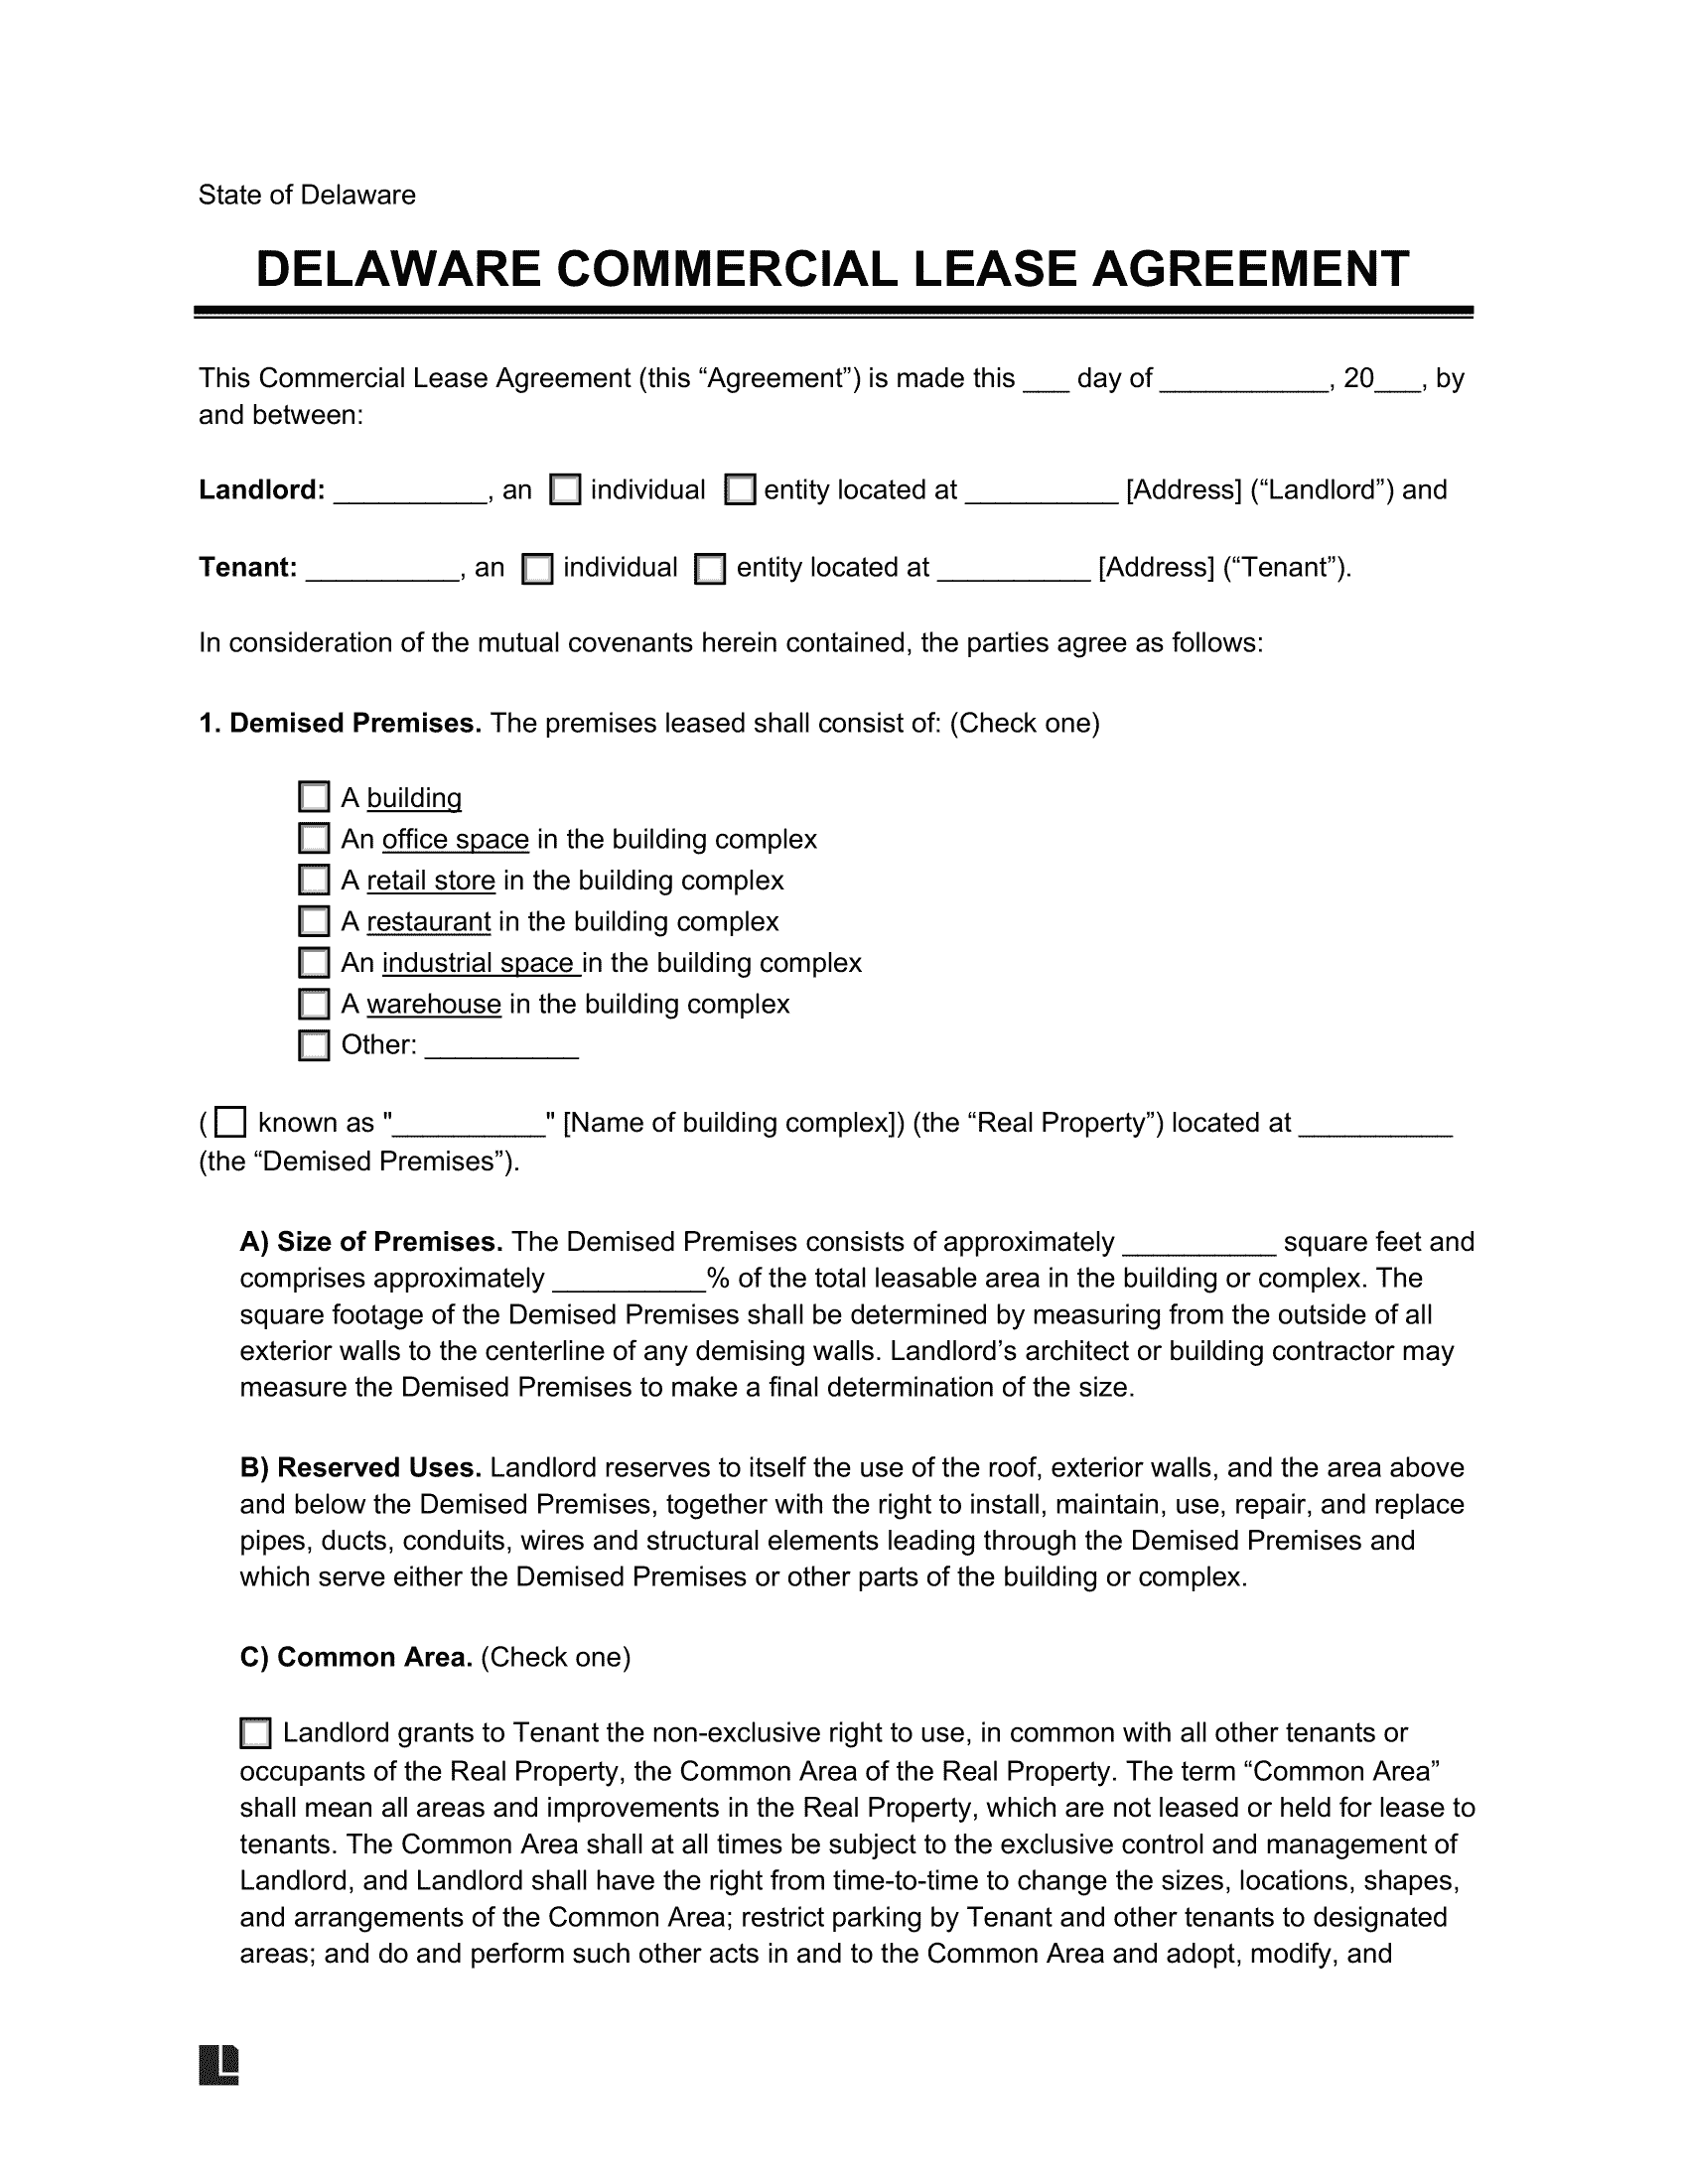 Delaware Commercial Lease Agreement